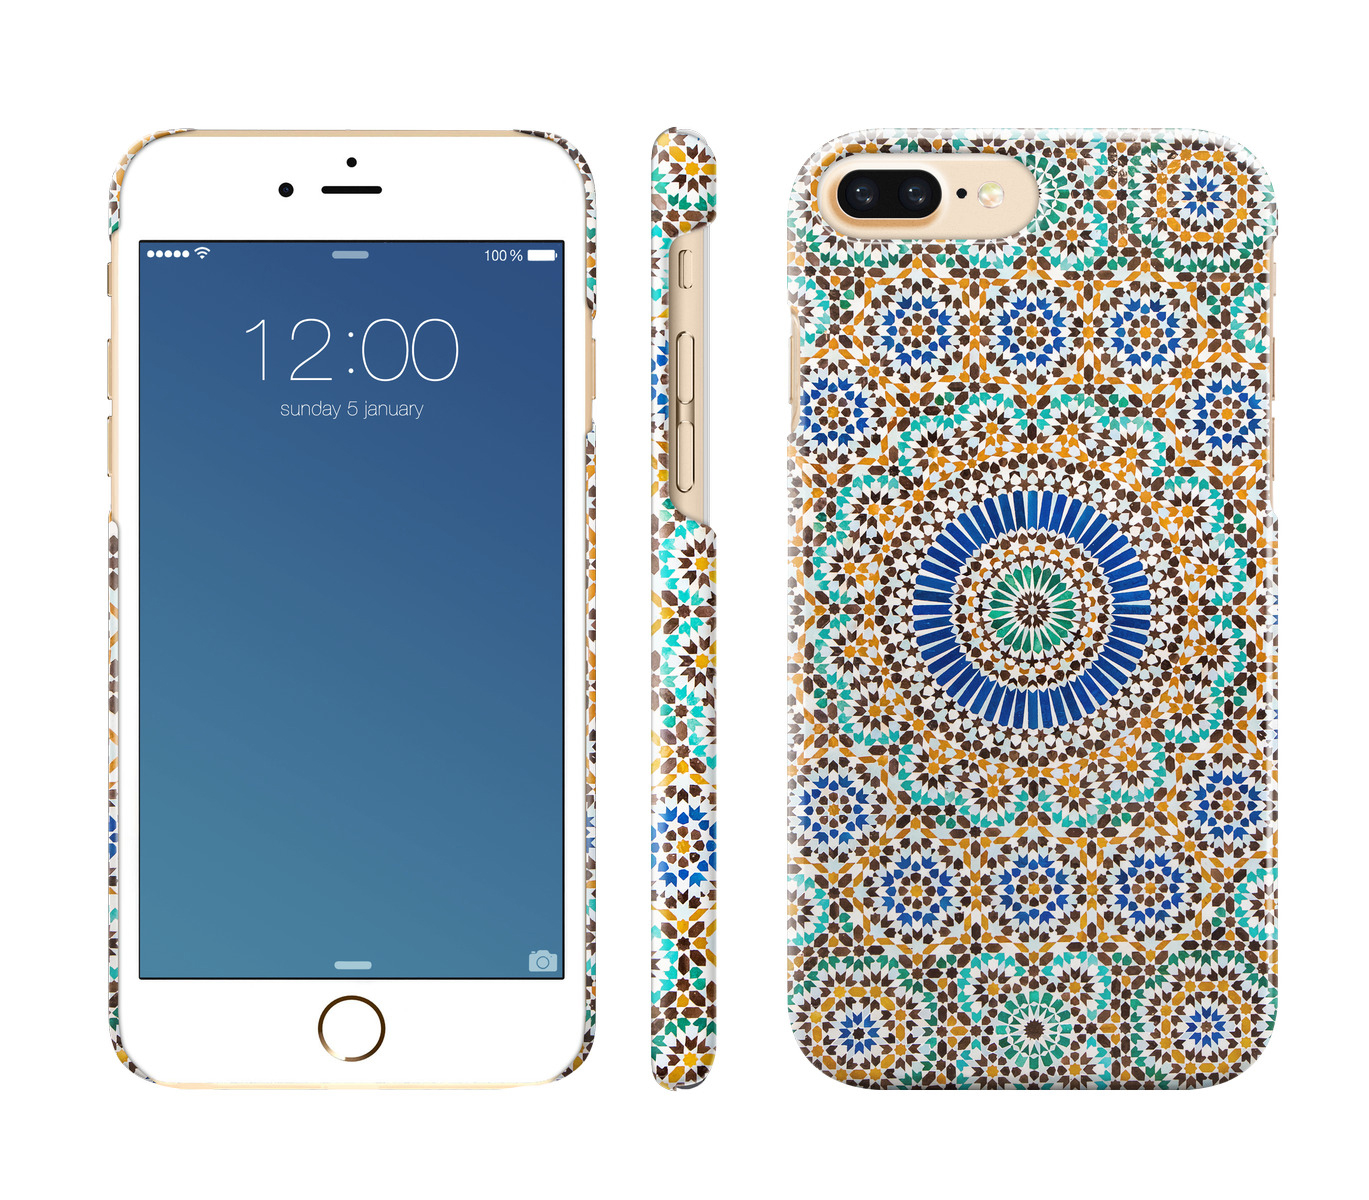 OF 6 ,iPhone Plus, Fashion, Apple, Plus iPhone iPhone 7 Zellige Backcover, 8 SWEDEN IDEAL Plus, Moroccan